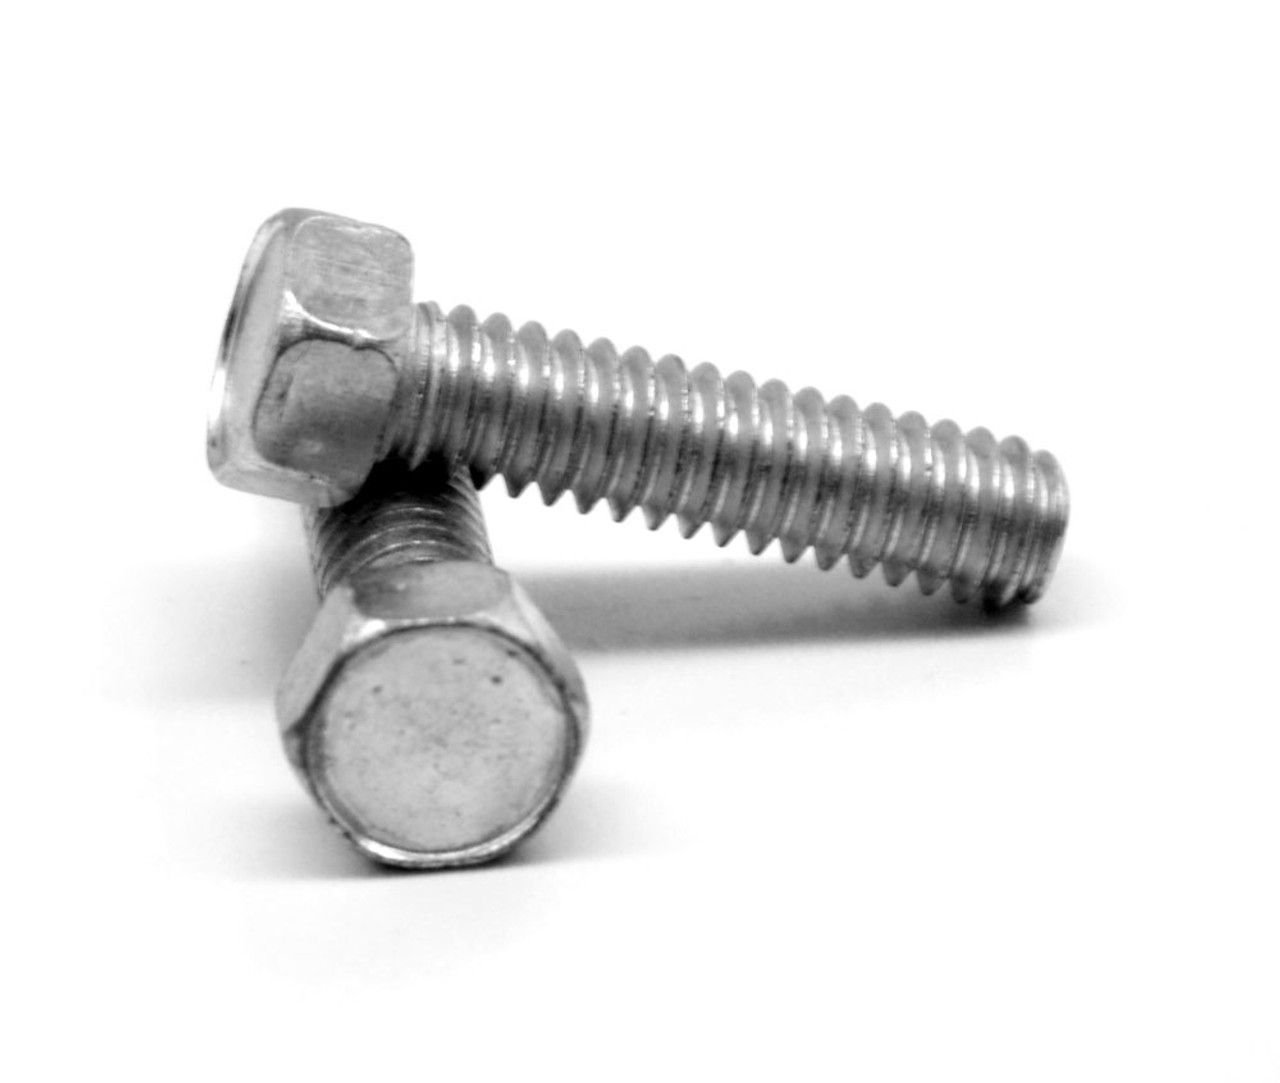 #10-24 x 2" (FT) Coarse Thread Machine Screw Indented Hex Head Low Carbon Steel Zinc Plated